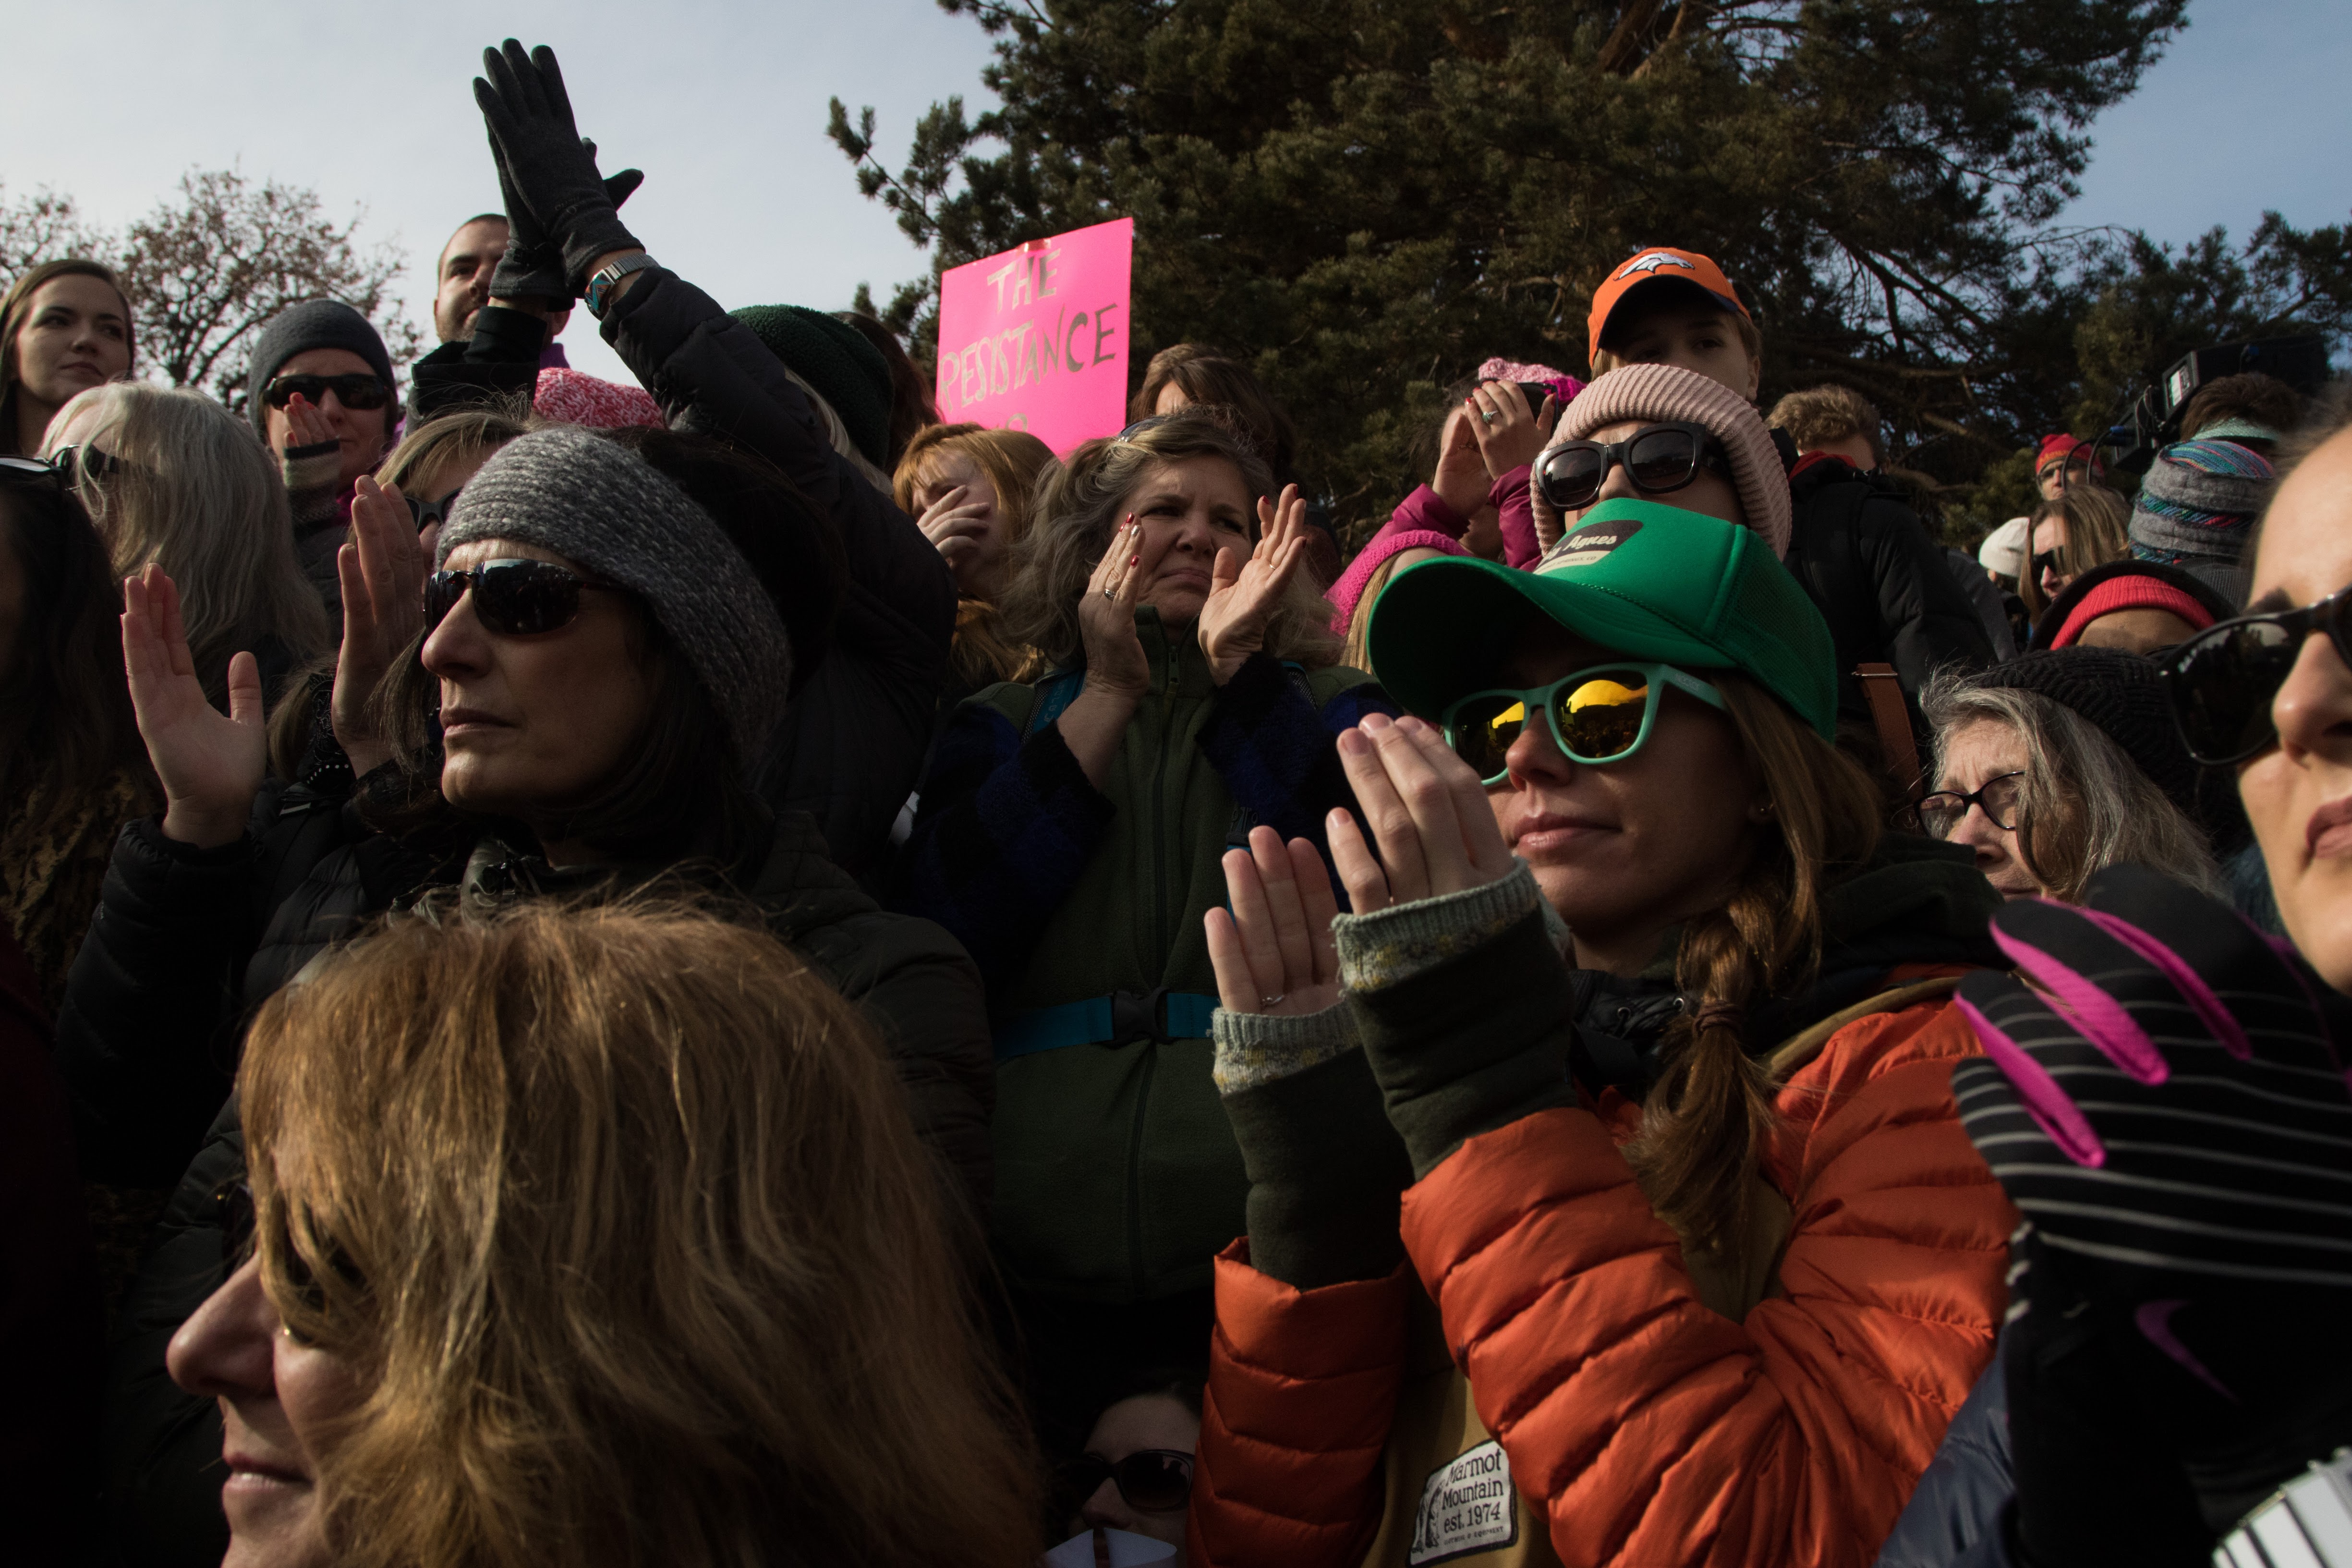 Women’s March on Denver, part of largest demonstration in U.S. history, drew over 100,000